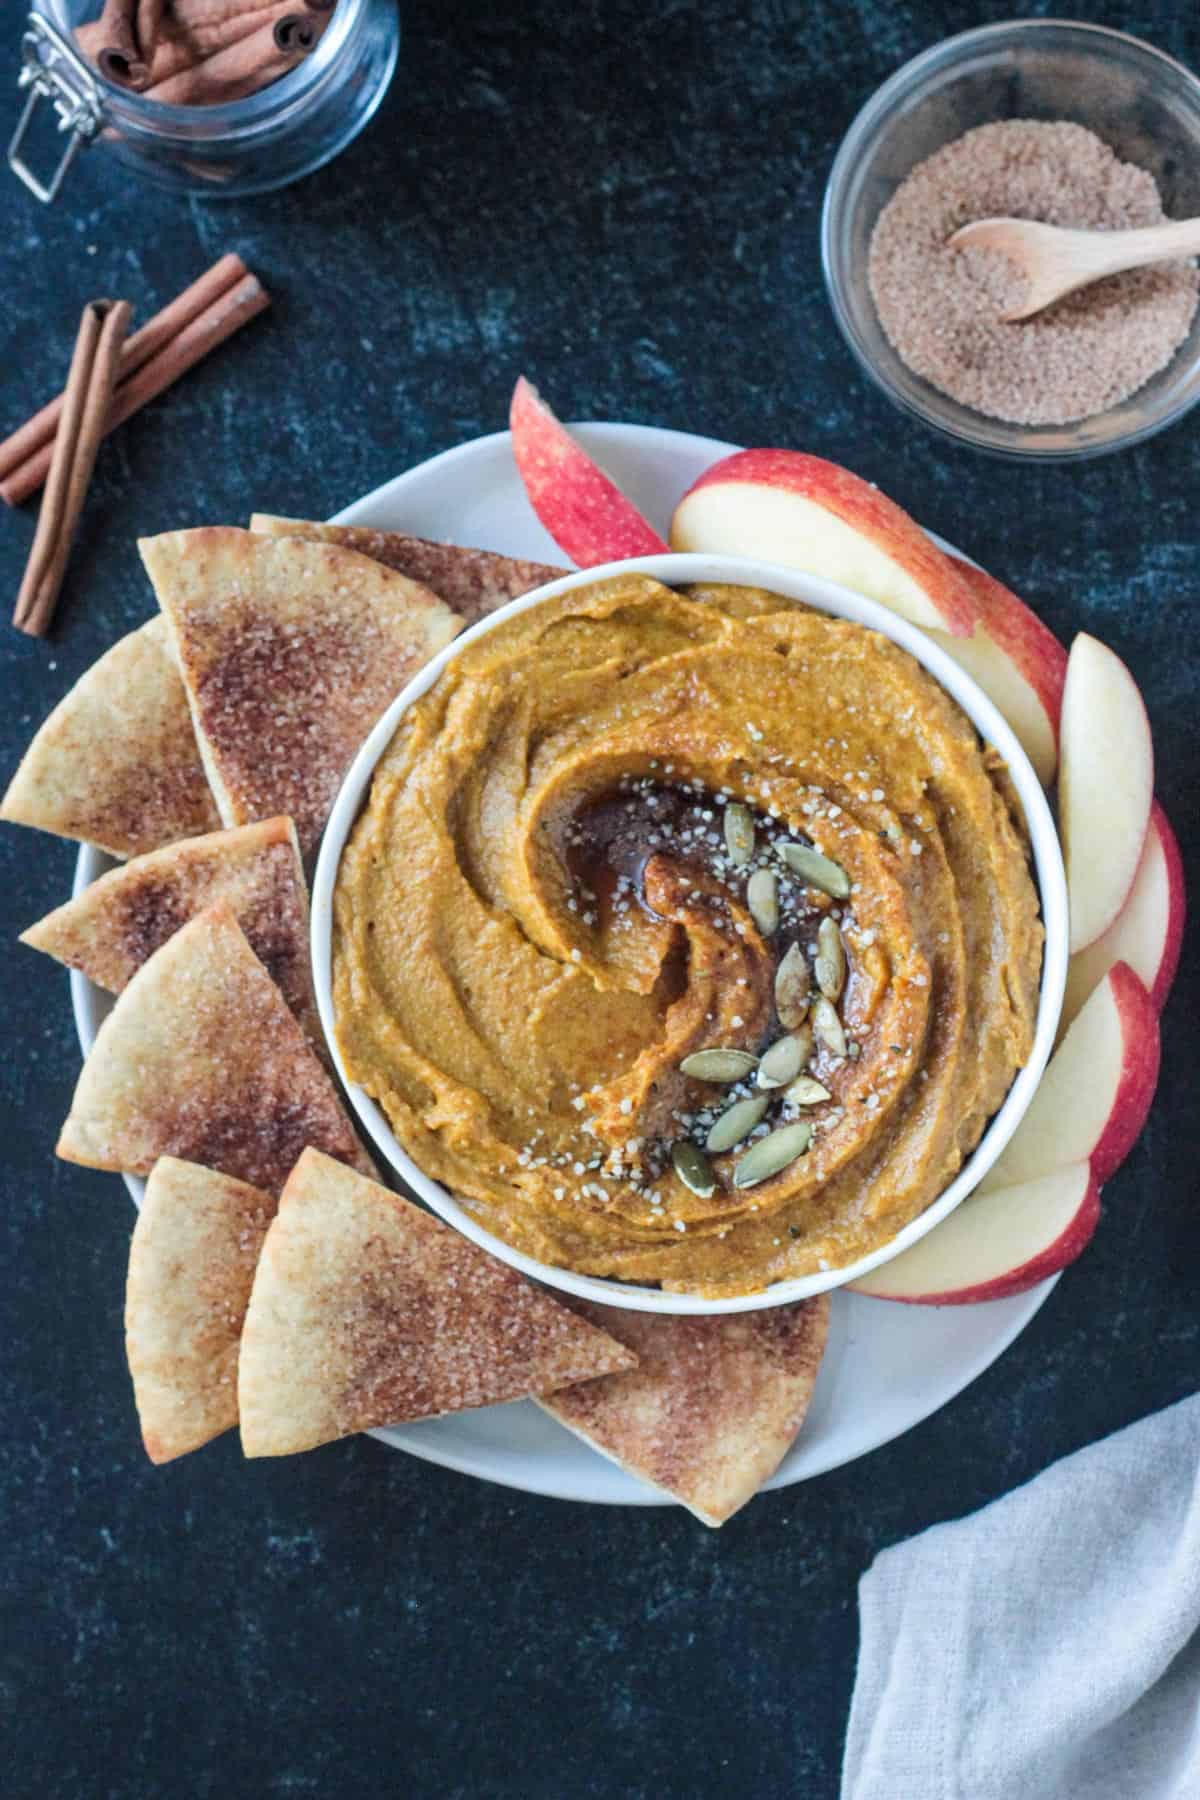 Sweet pumpkin hummus garnished with maple syrup and pumpkin seeds next to sweet pita chips.